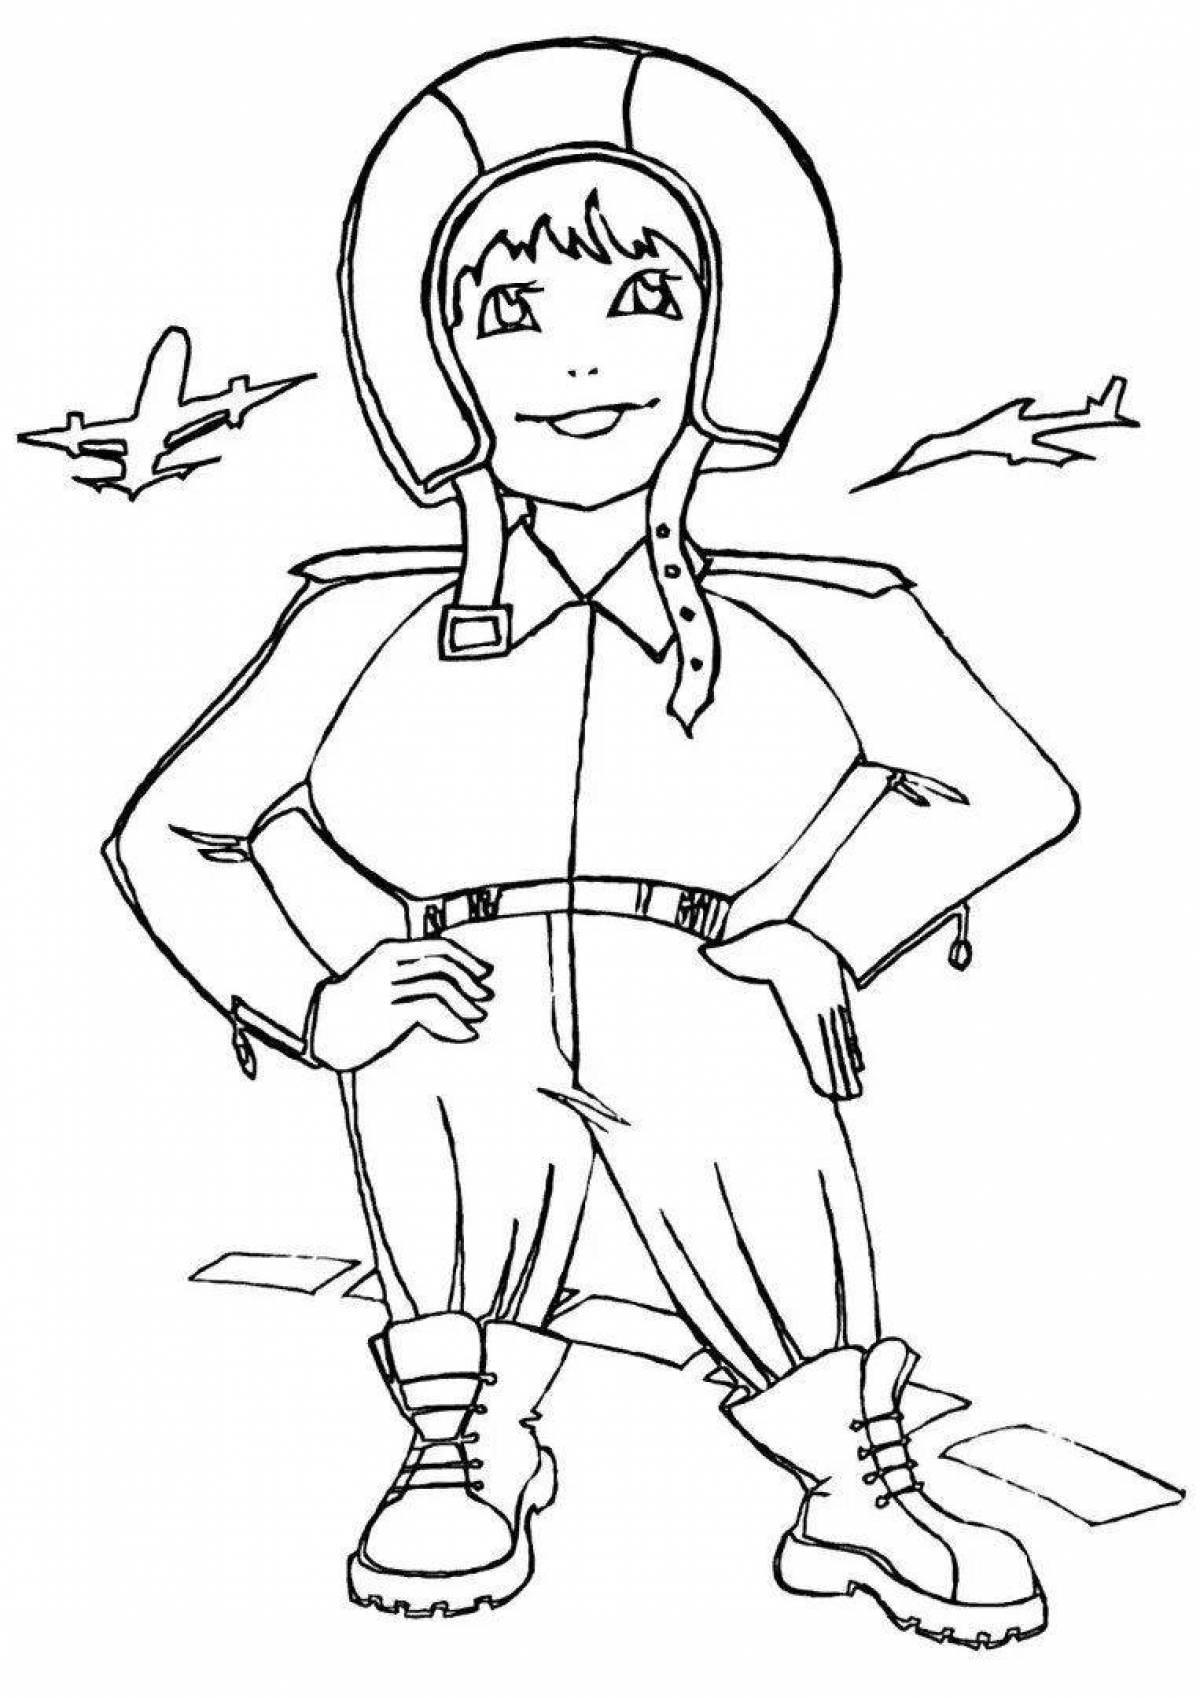 Great military pilot coloring book for kids